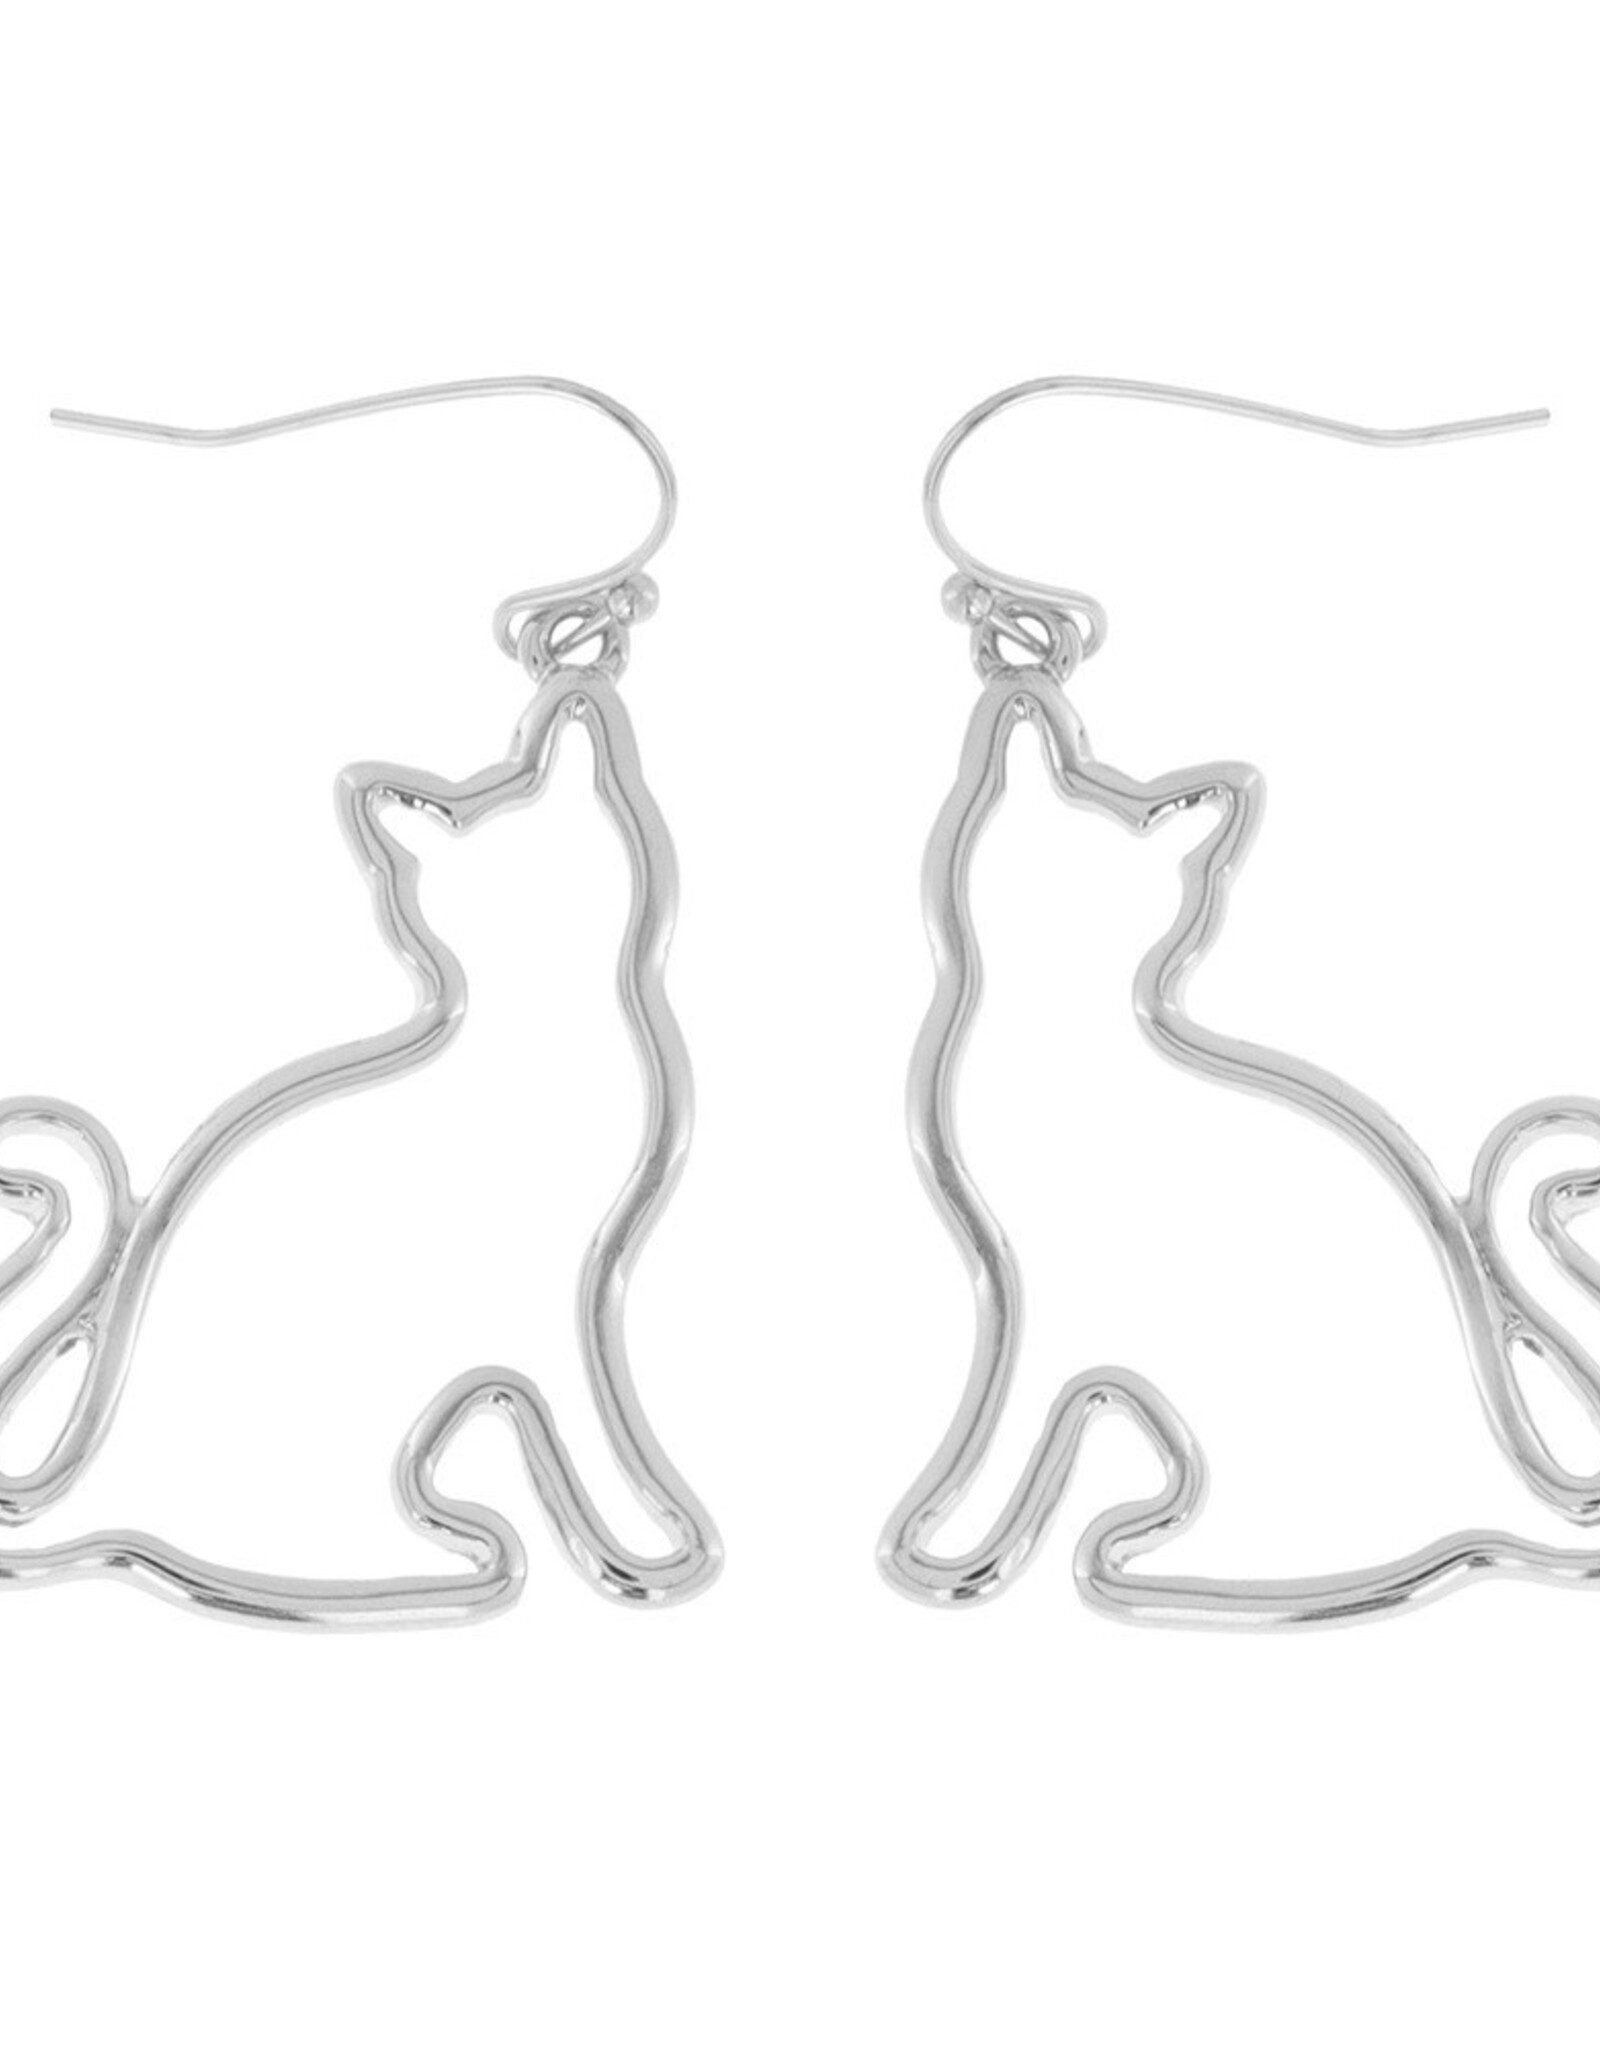 EARRINGS-CAT CURLED TAIL